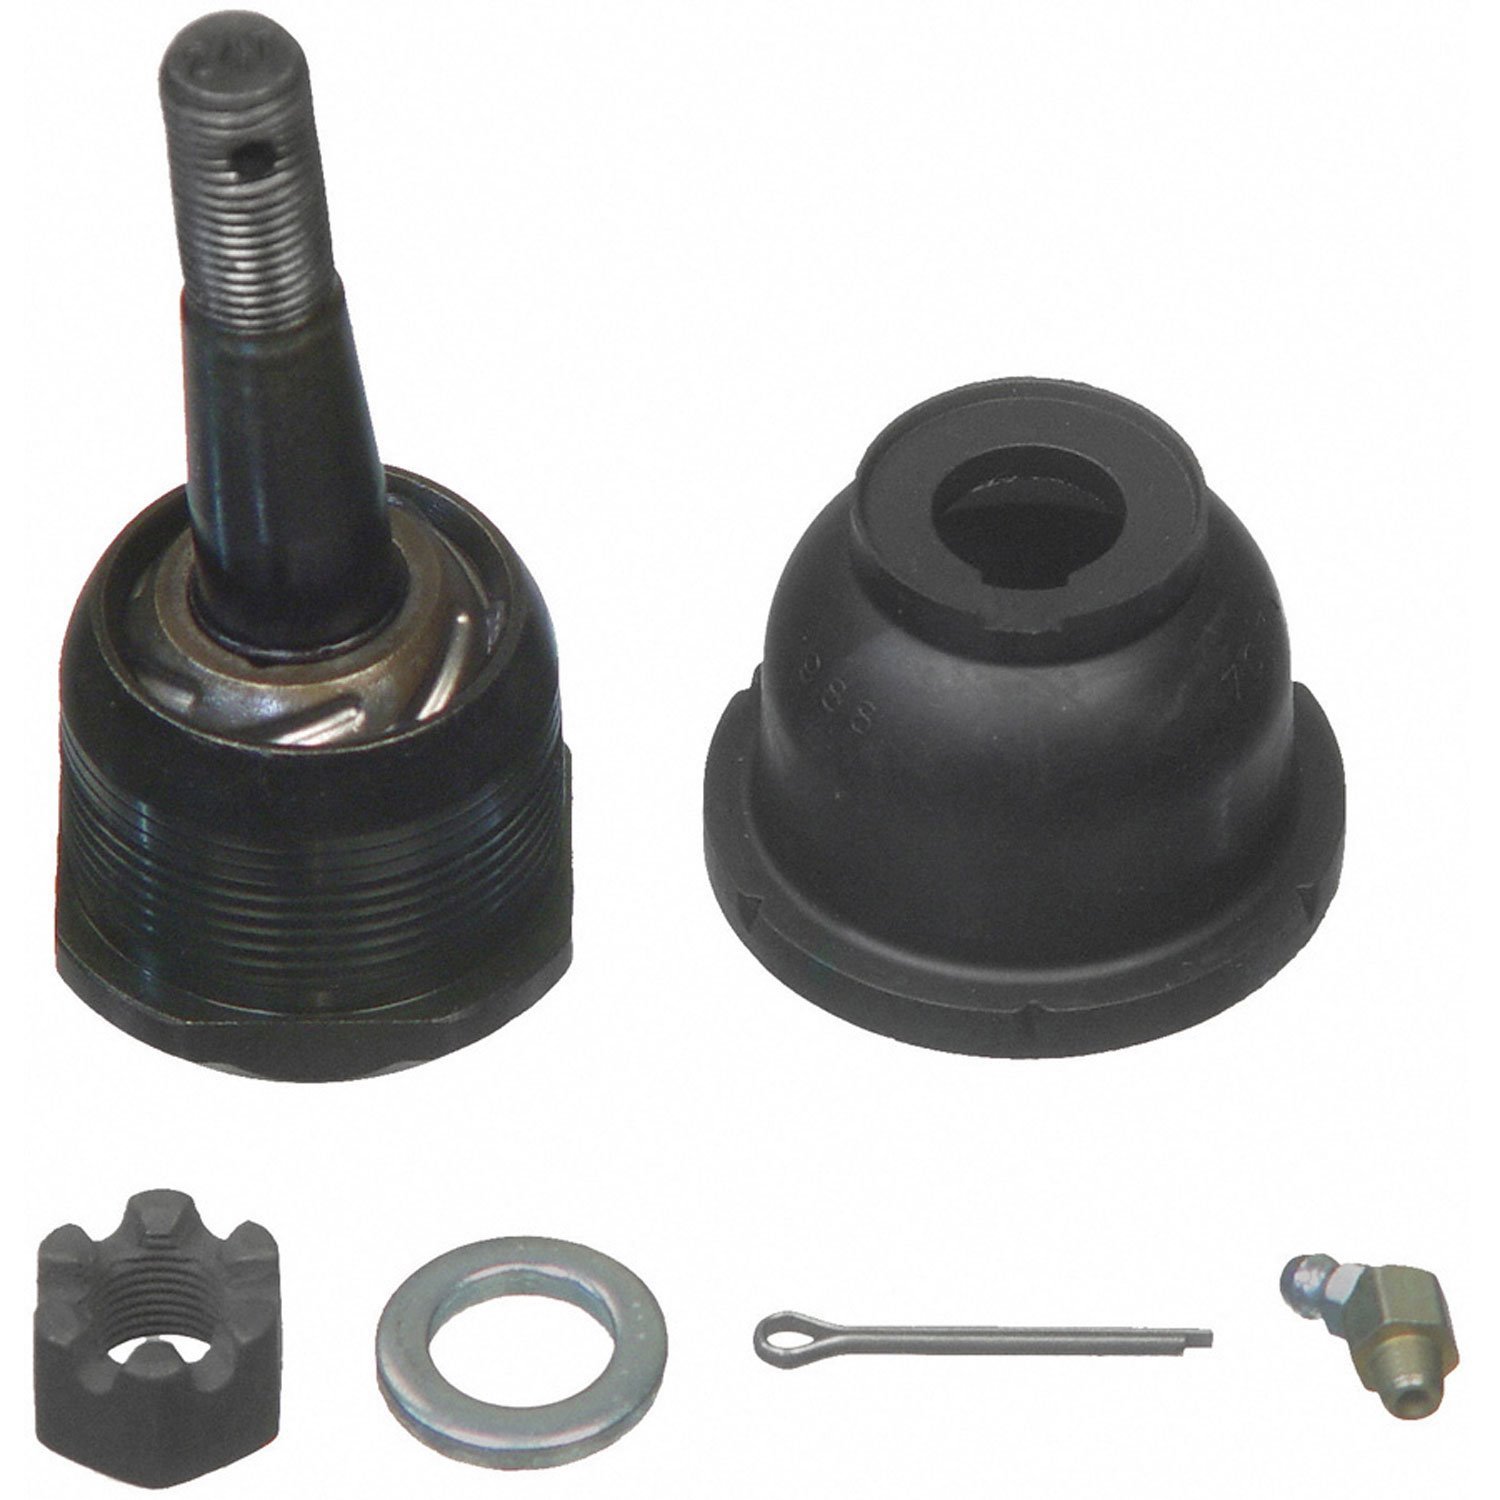 Front Upper Ball Joint Fits Select 1957-1989 Chrysler, Desoto, Dodge, Plymouth Models